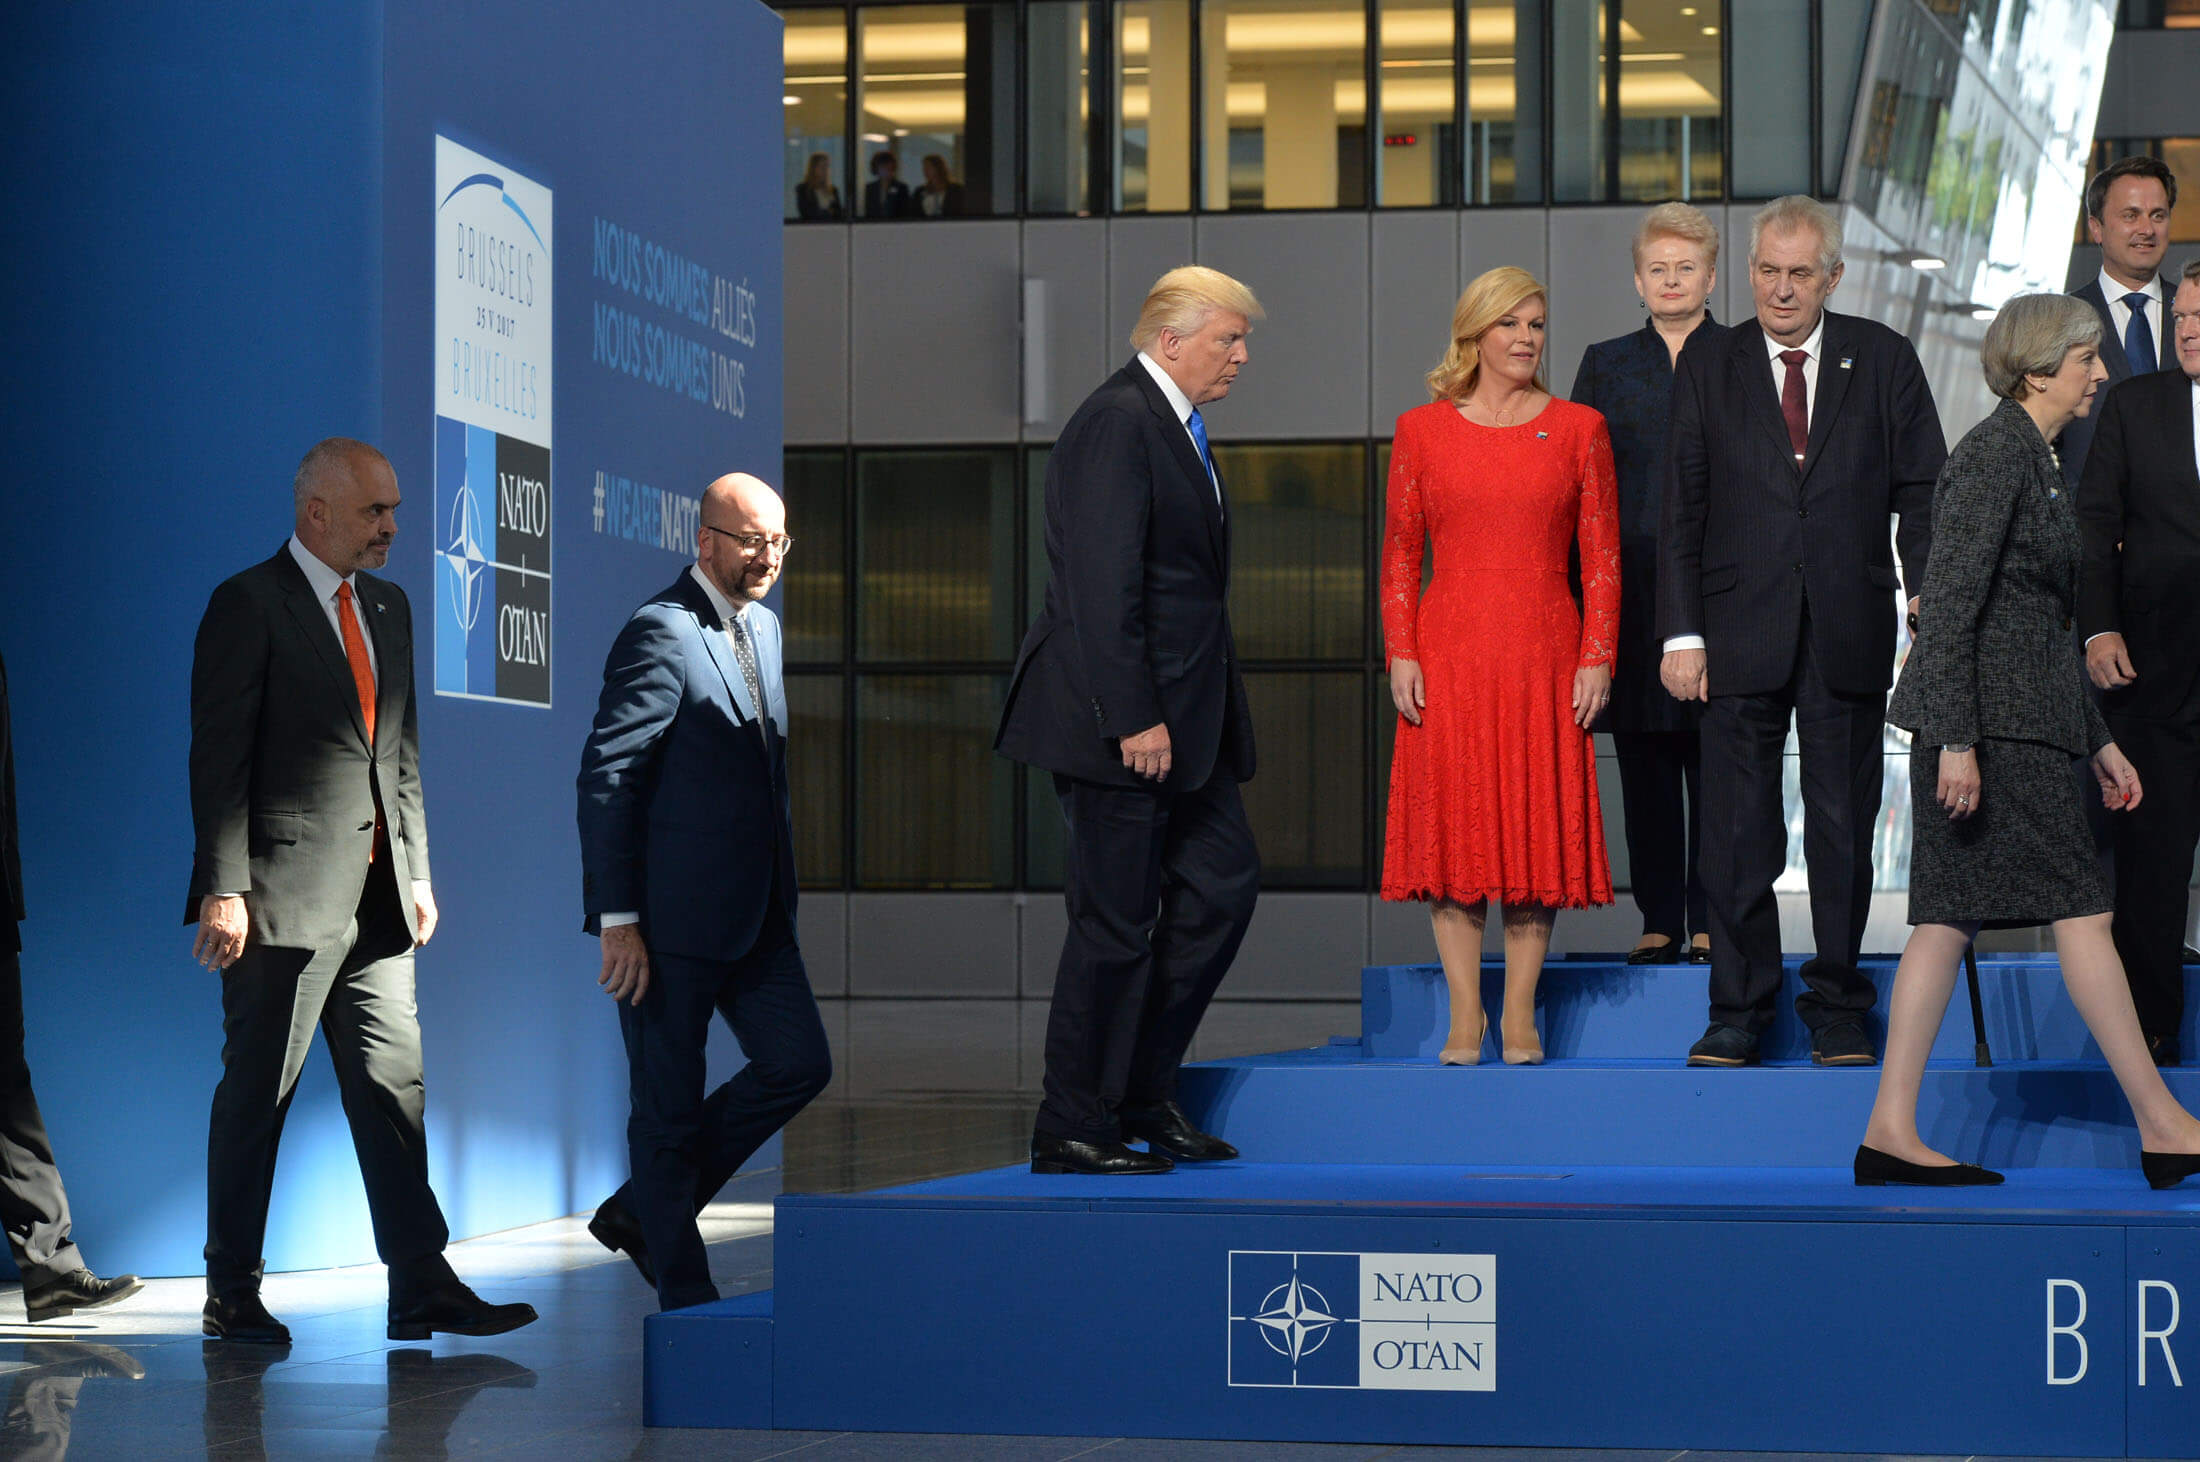 Janssens-Family portrait of NATO Heads of State and Government - Meeting of NATO Heads of State and Government in Brussels